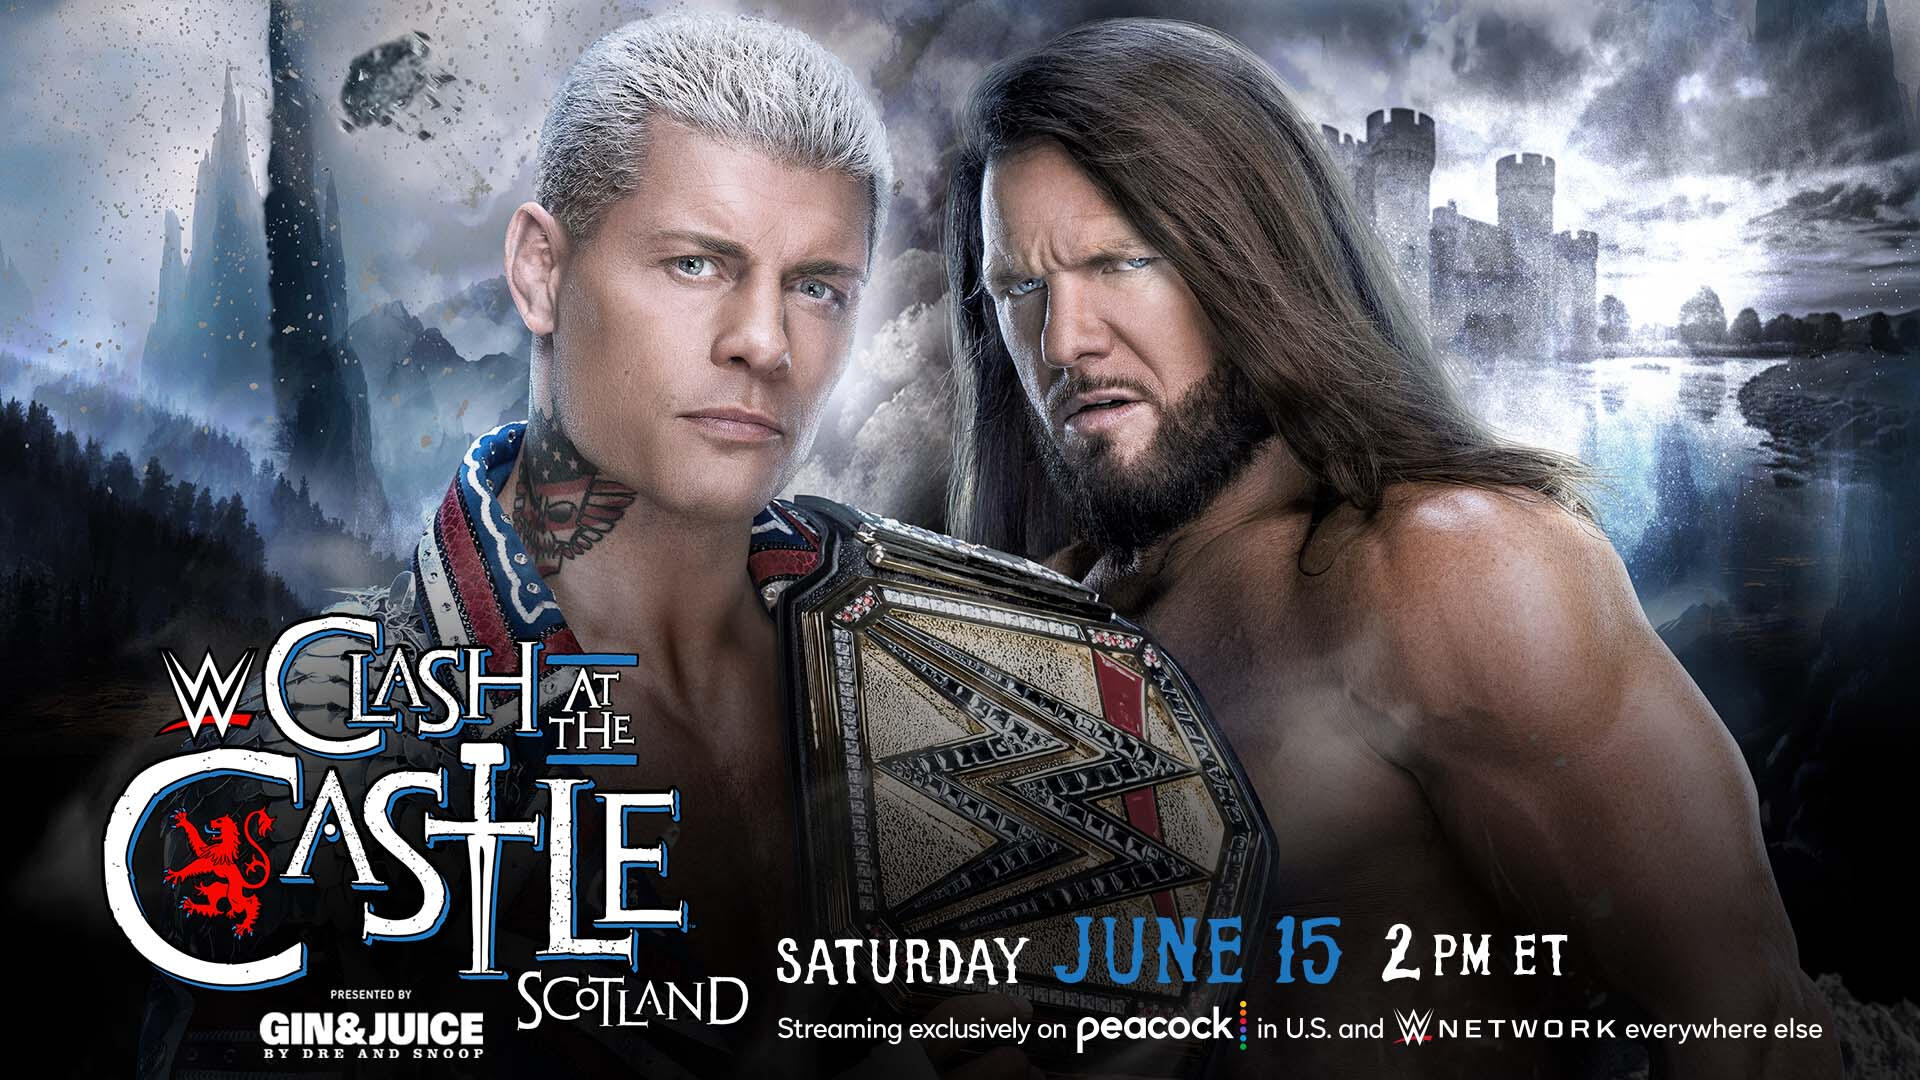 WWE Championship’s “I Quit Match” Scheduled for the Clash at the Castle in Scotland